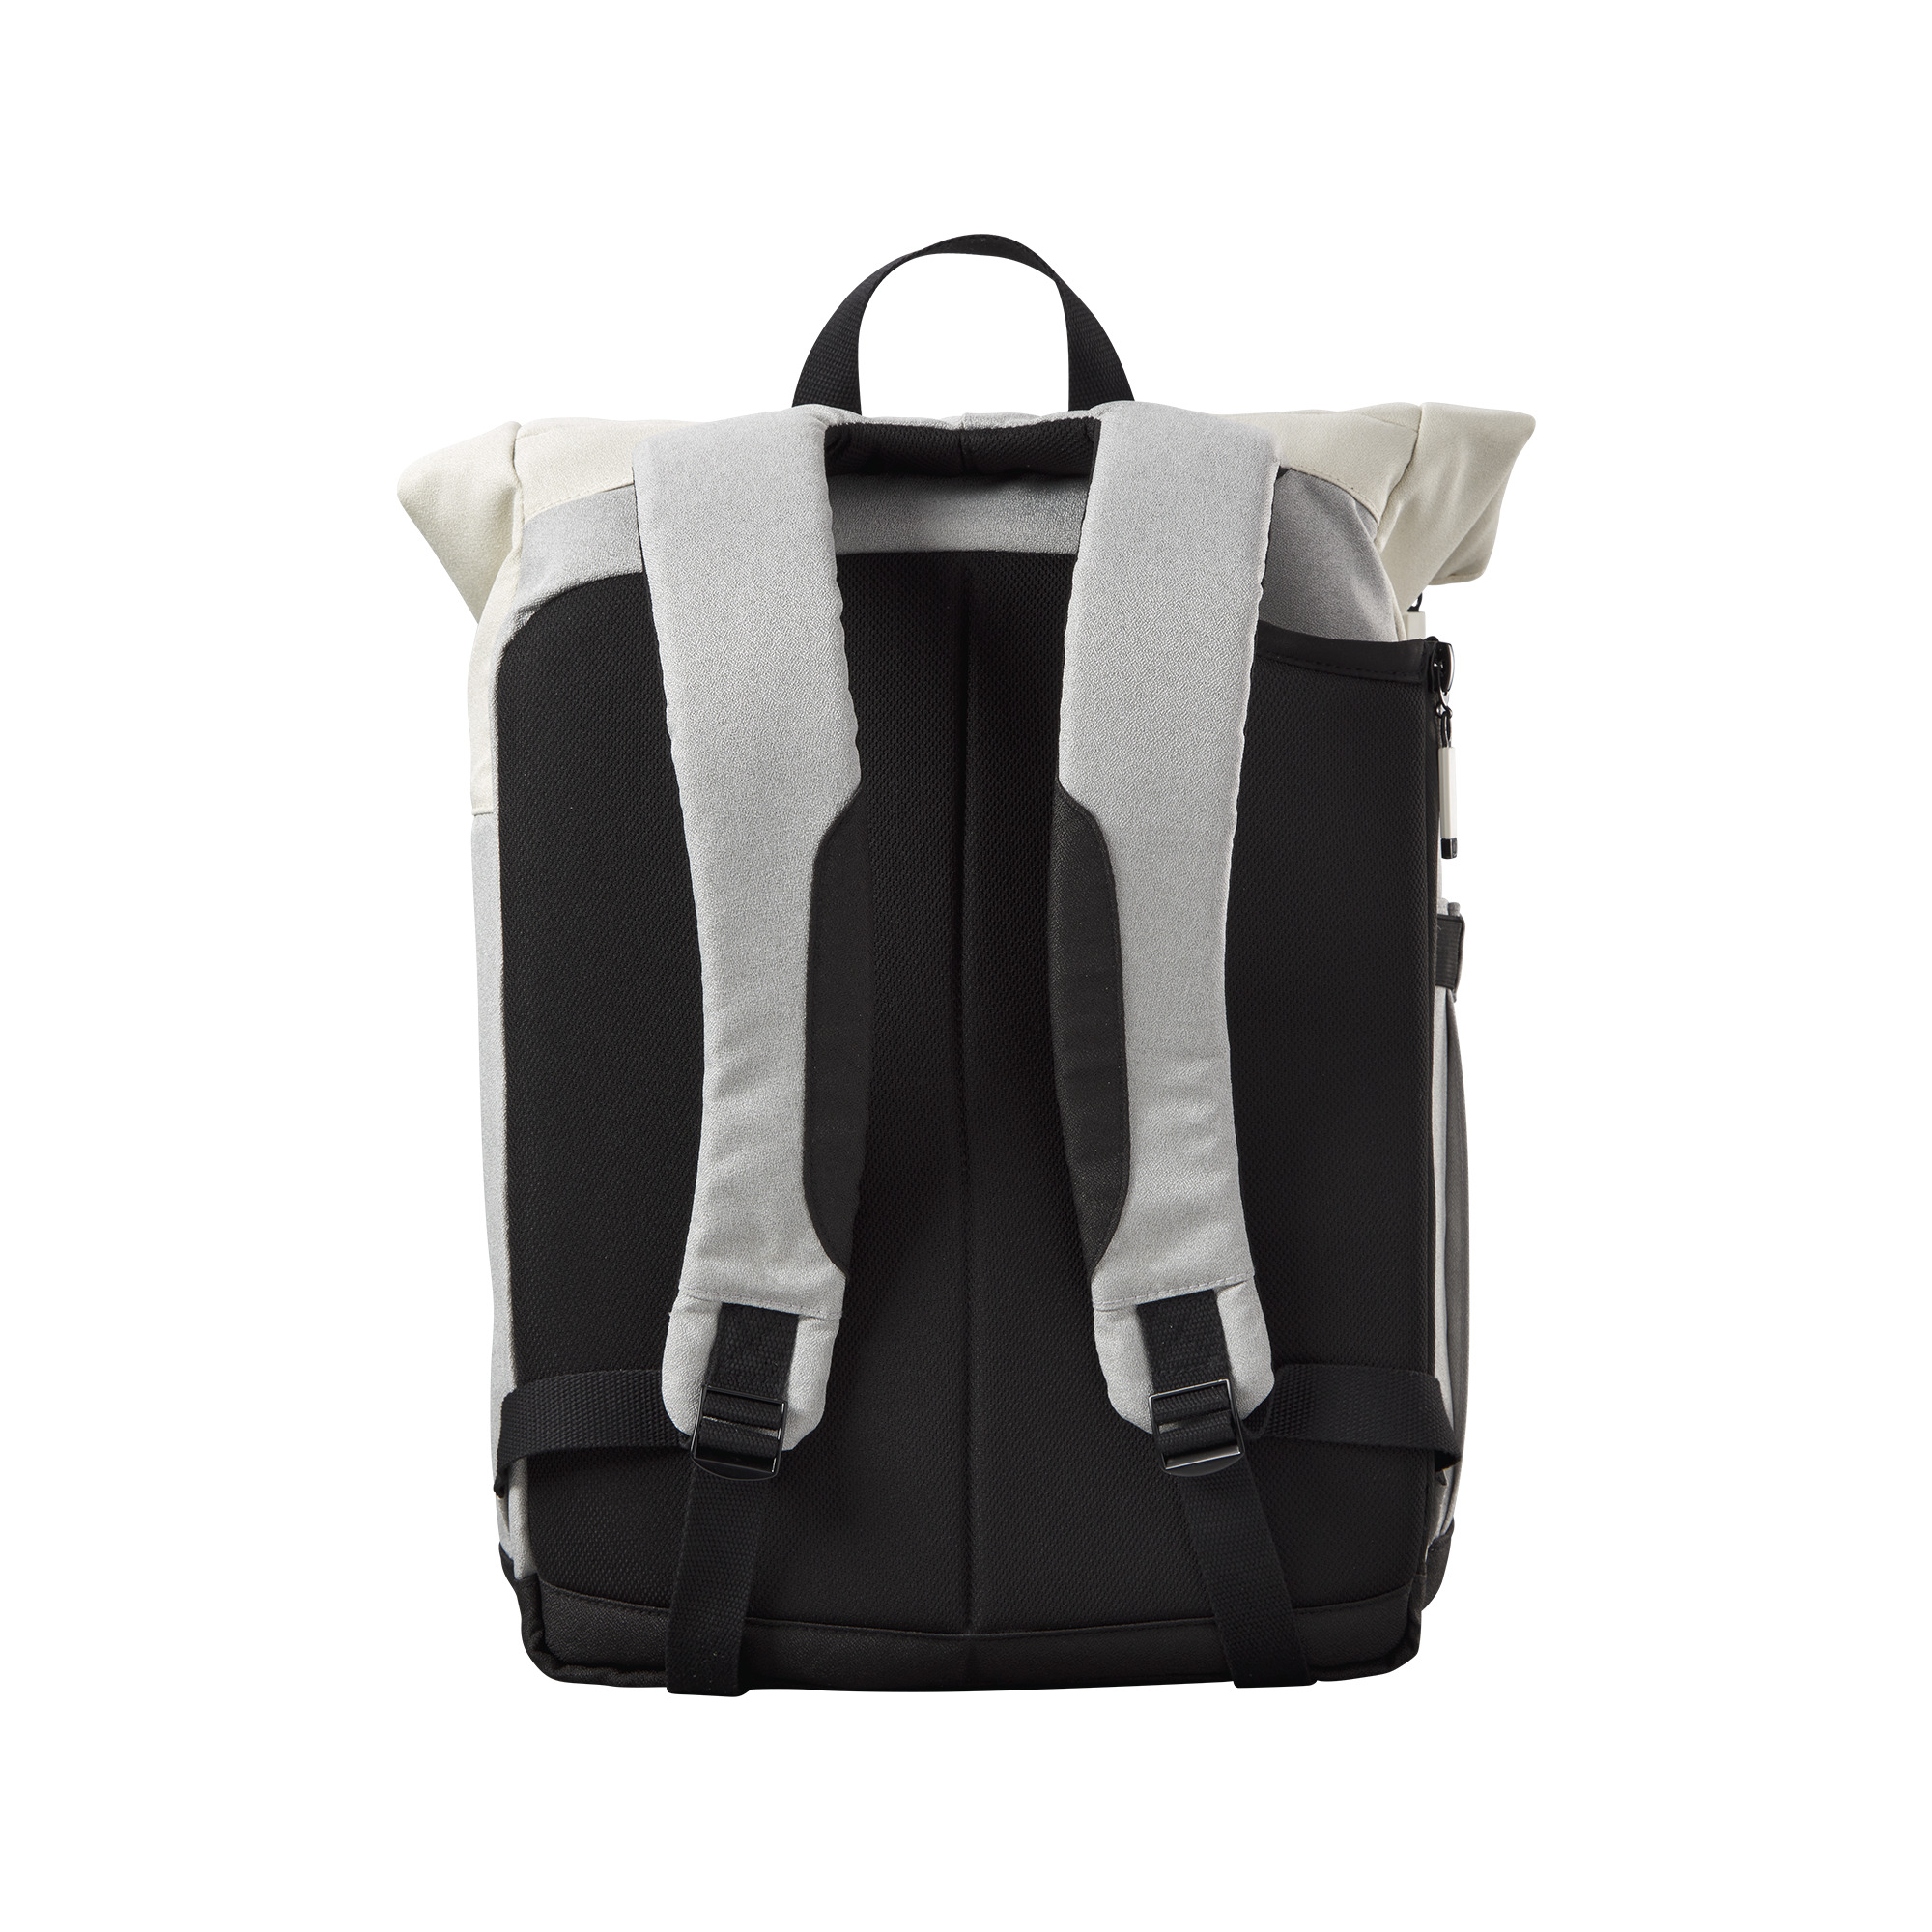 WR8023201_2_Lifestyle_Foldover_Backpack_GY_BU.png.high-res